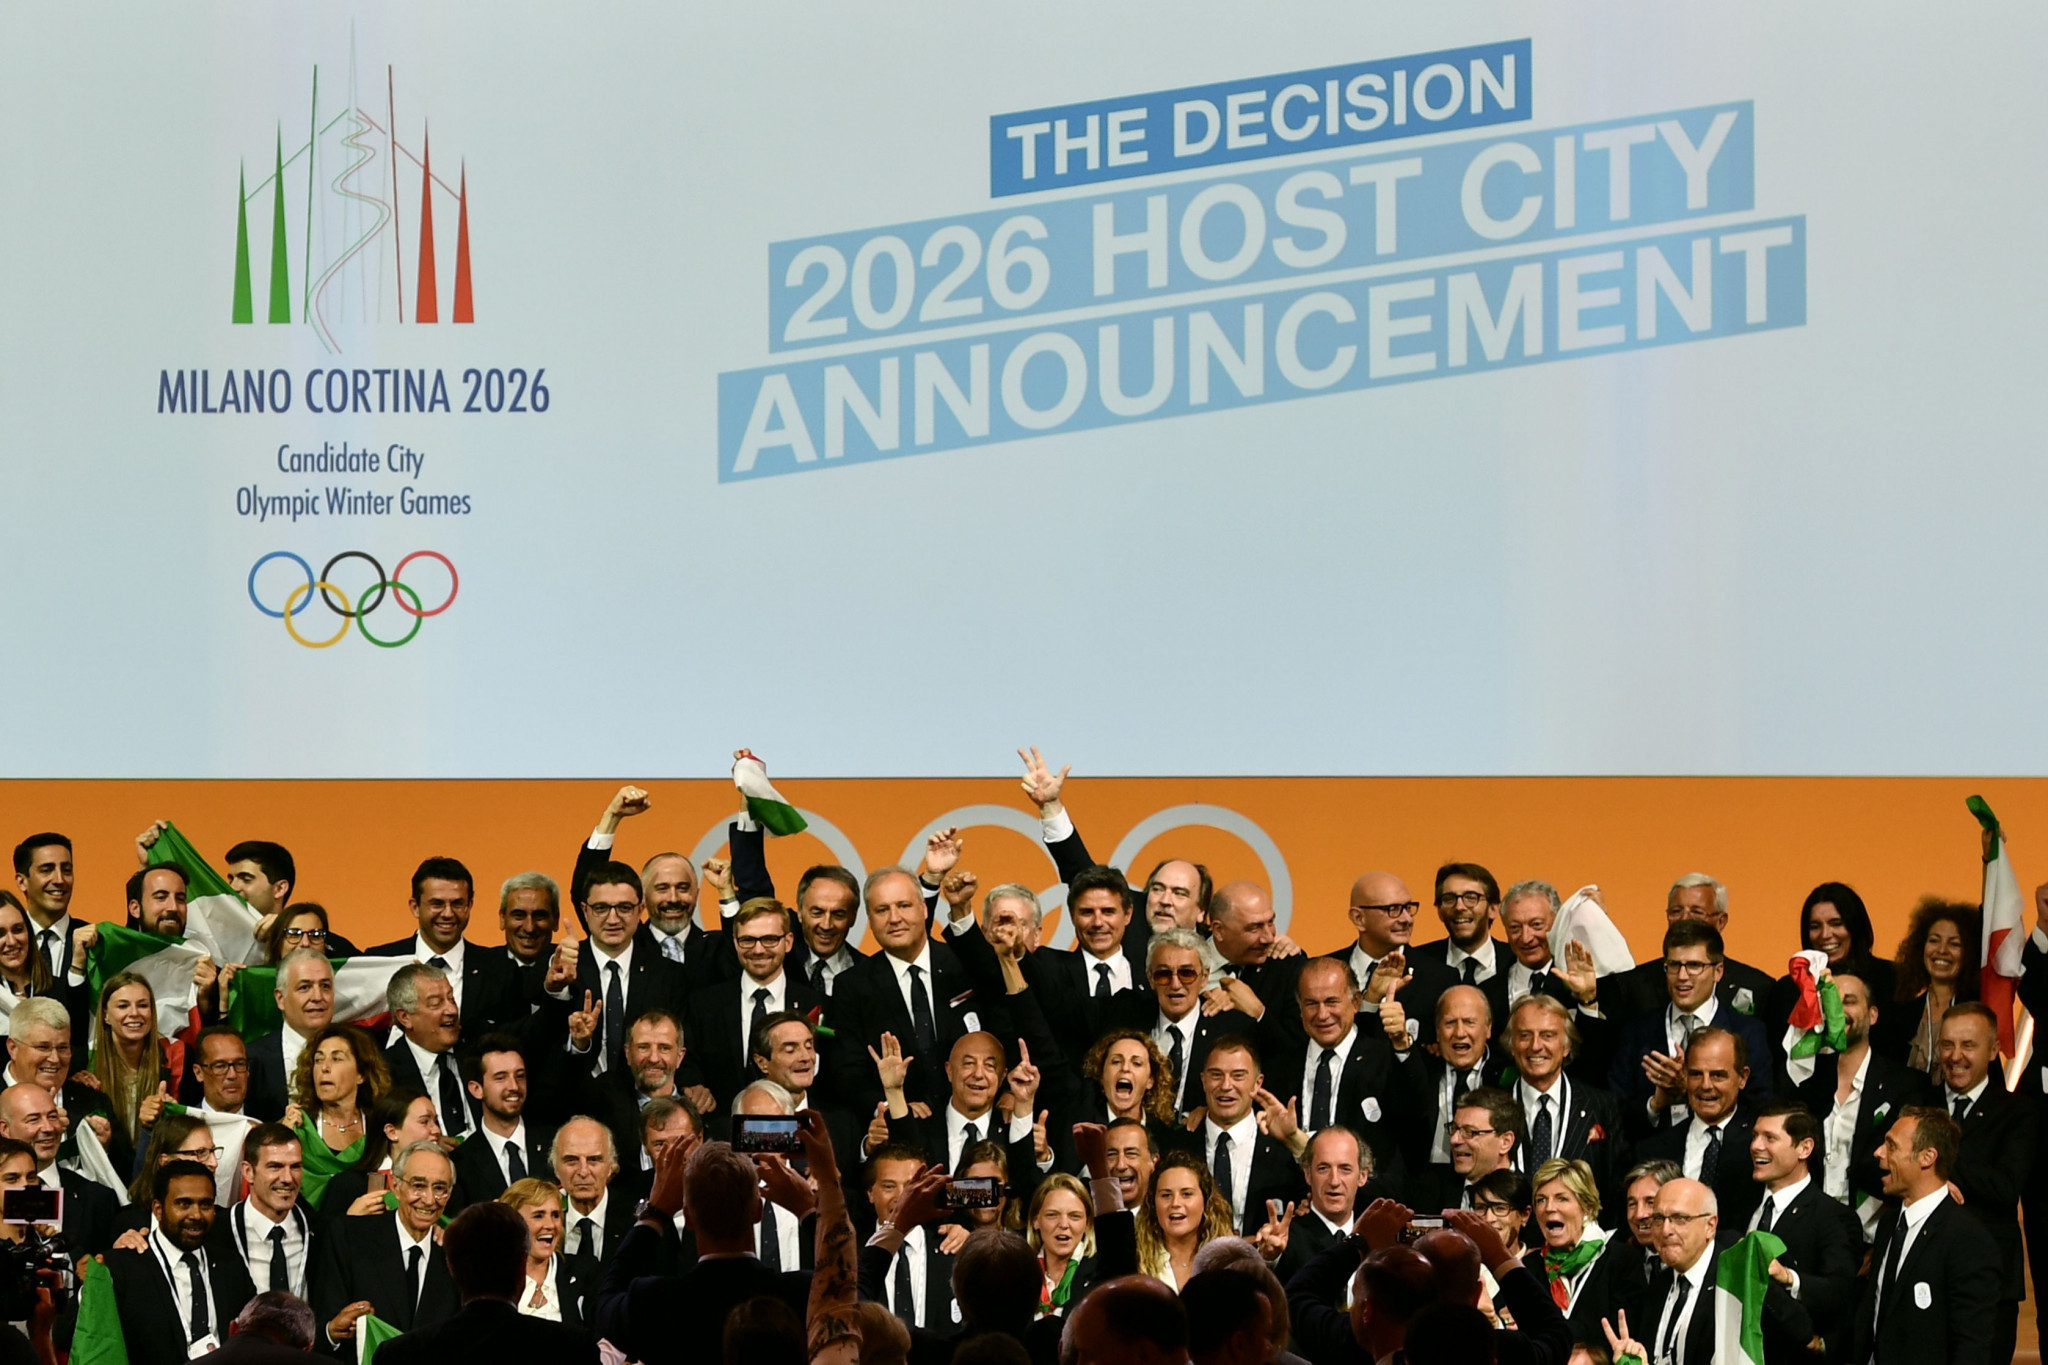 The Milan Cortina 2026 Foundation Board of Directors did not change the Games' lifetime budget despite economic challenges ©Getty Images